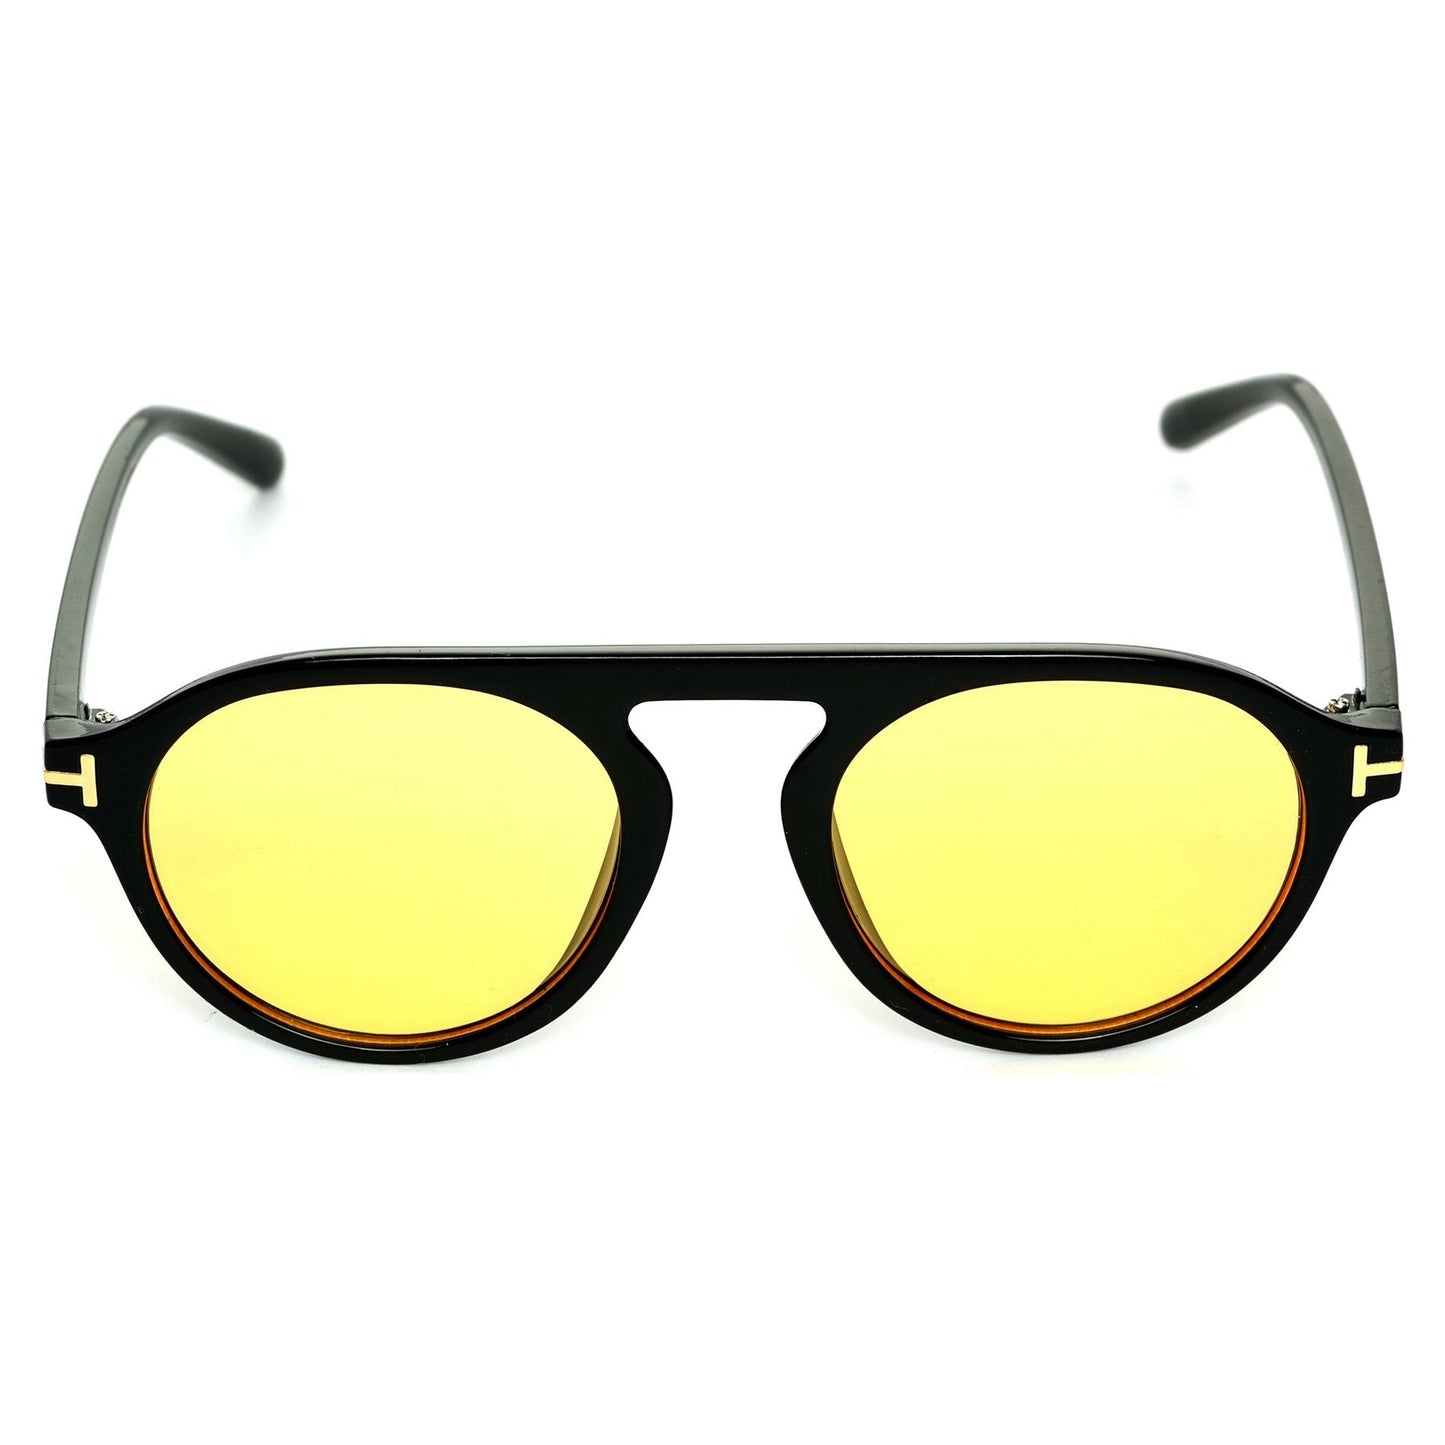 Round Yellow And Black Sunglasses For Men And Women-SunglassesCarts